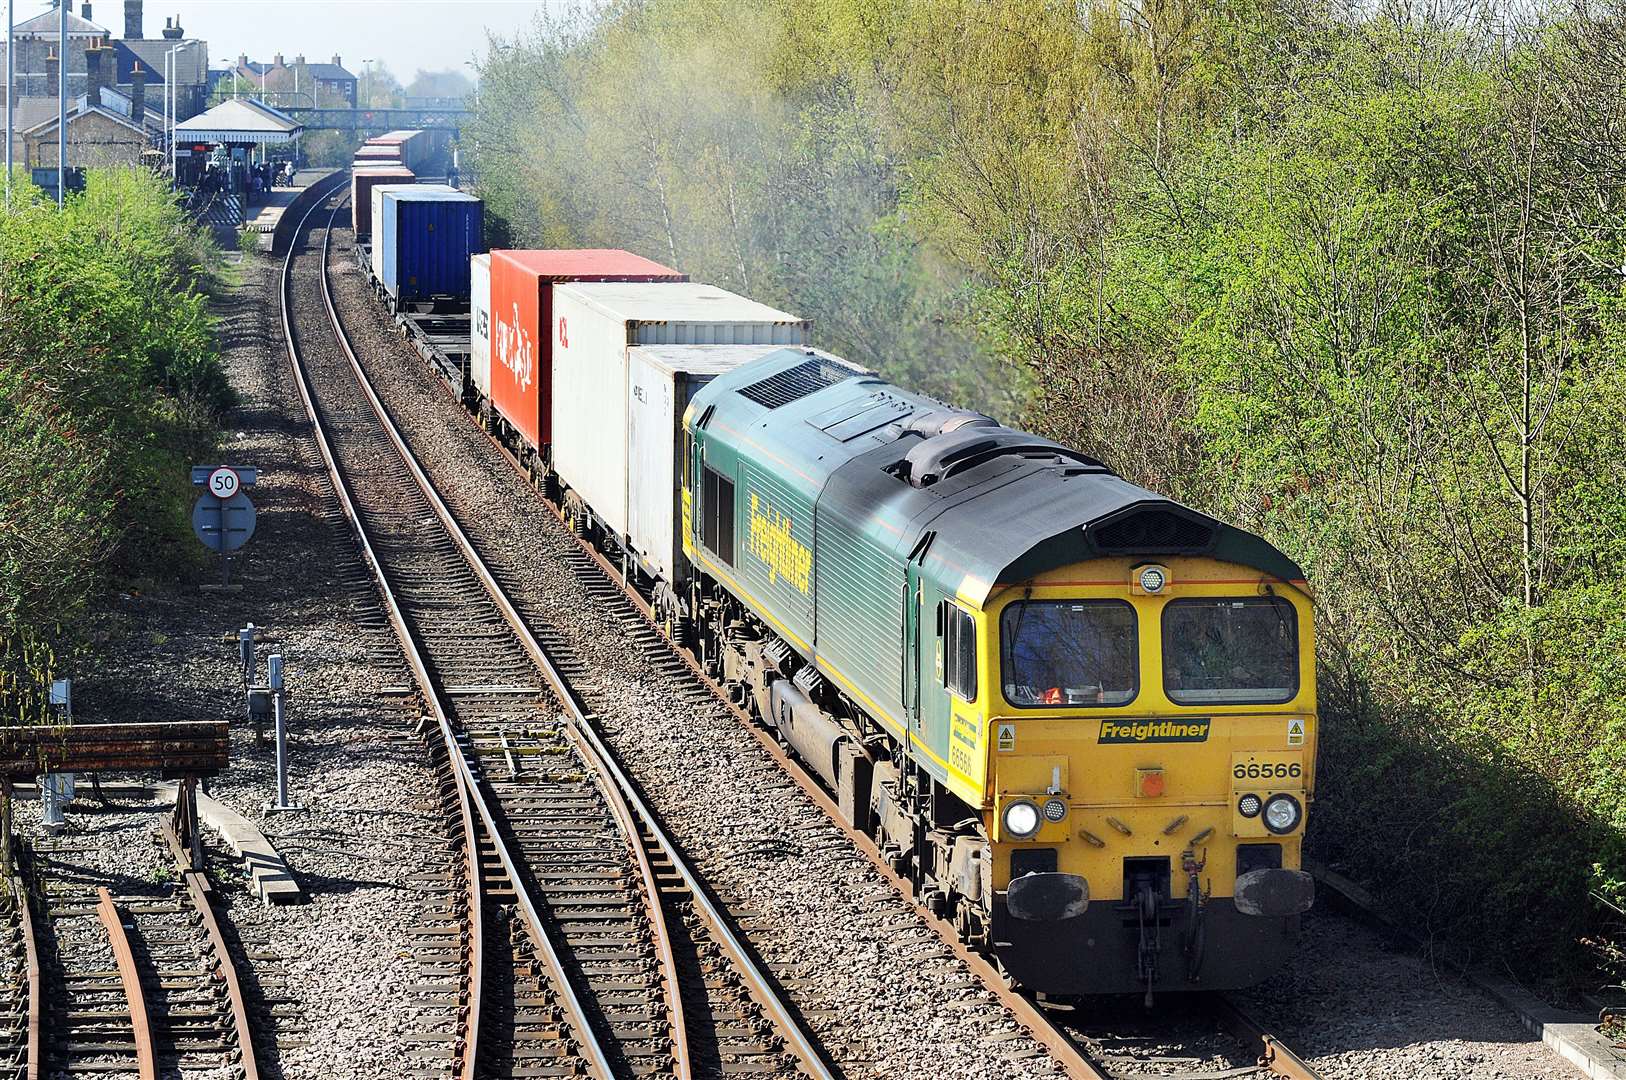 Freight trains will be permitted to continue using red diesel after April 1